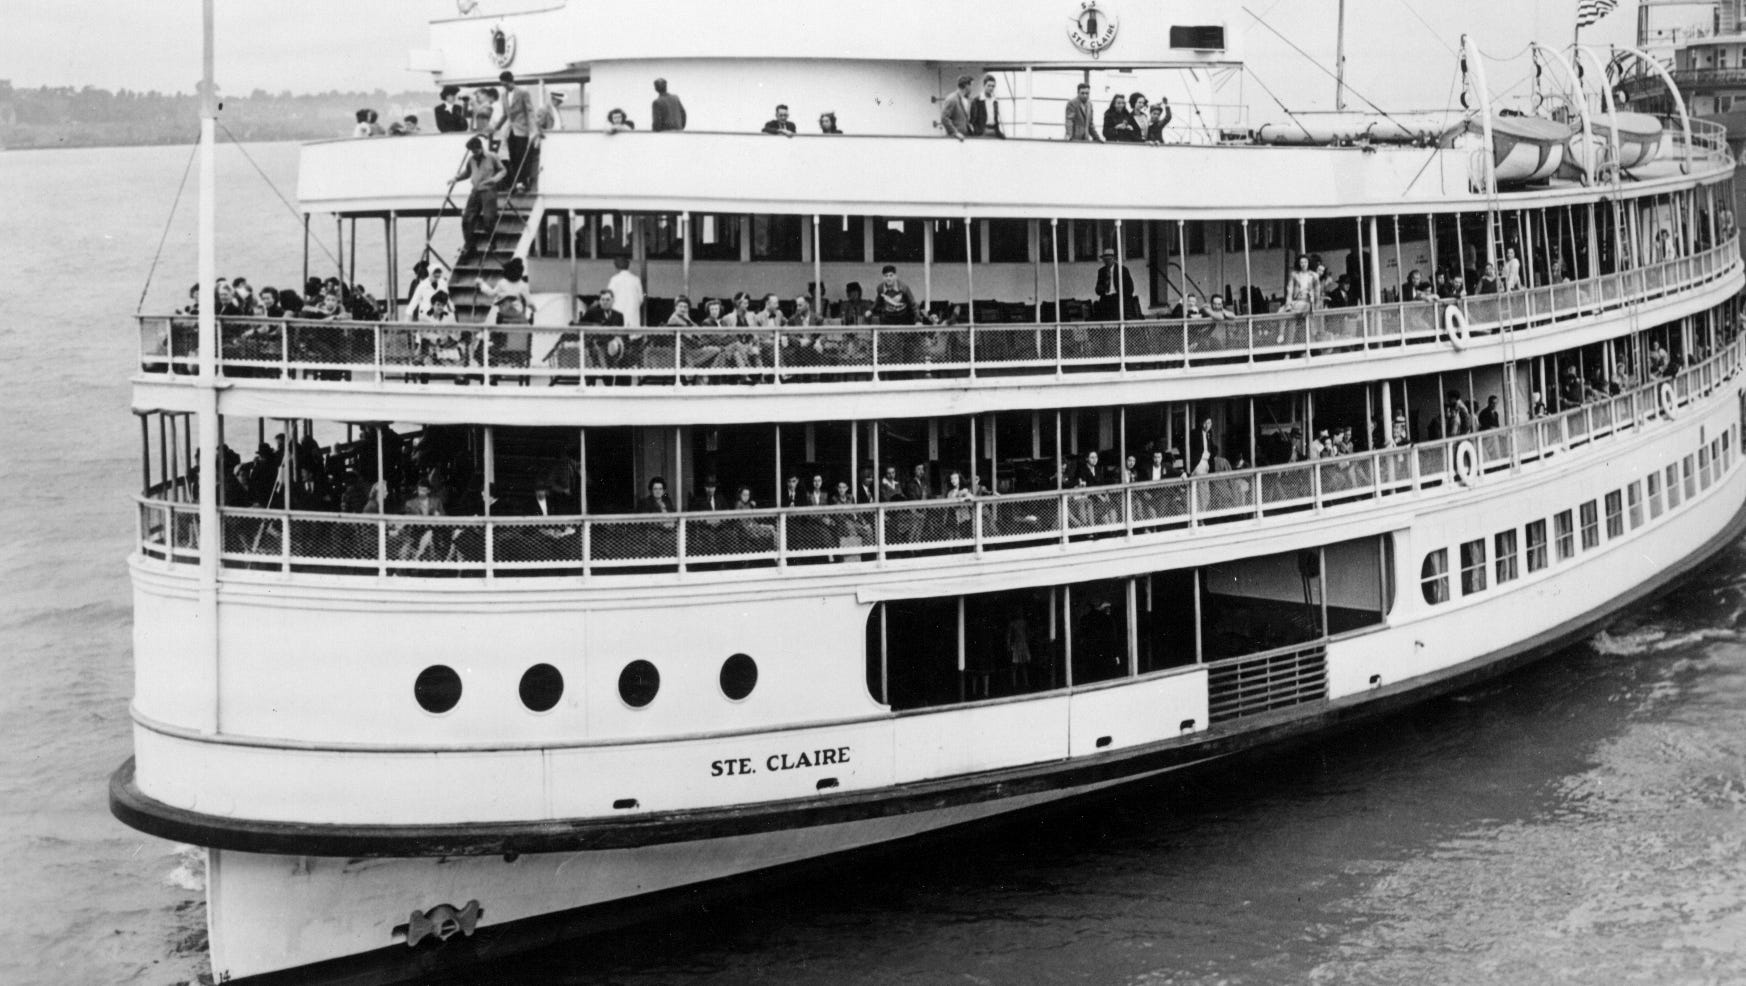 The Ste. Claire leaves Detroit with passengers bound for Boblo Island in 1959. The Boblo Island Amusement Park would close on Sept. 30, 1993, leaving only fond memories for generations of Detroiters.